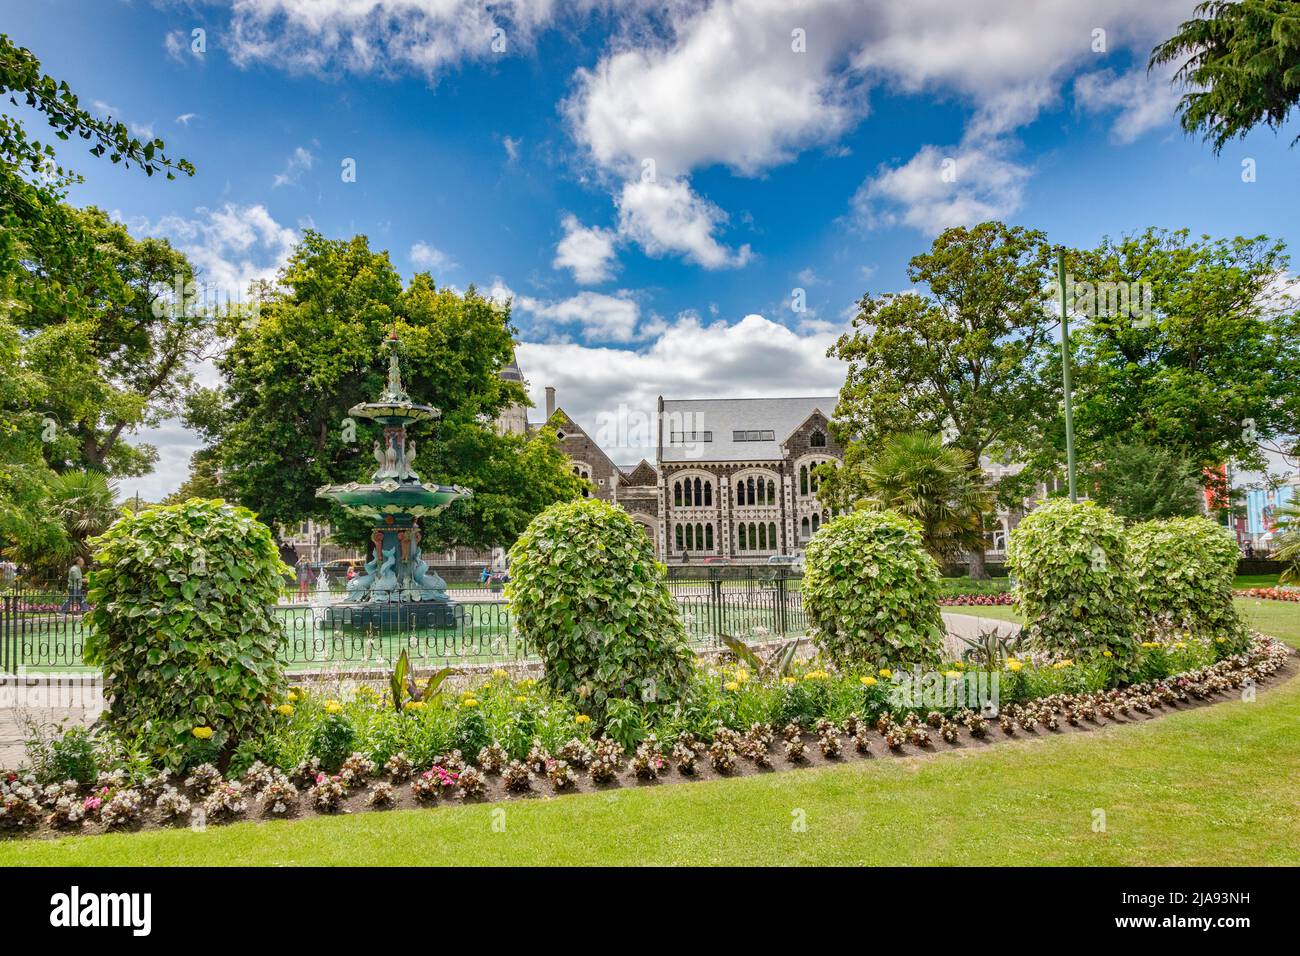 8. Januar 2019: Christchurch, Neuseeland - The Botanical Gardens, with the Pfau Fountain and the Christchurch Arts Centre Buildings. Stockfoto